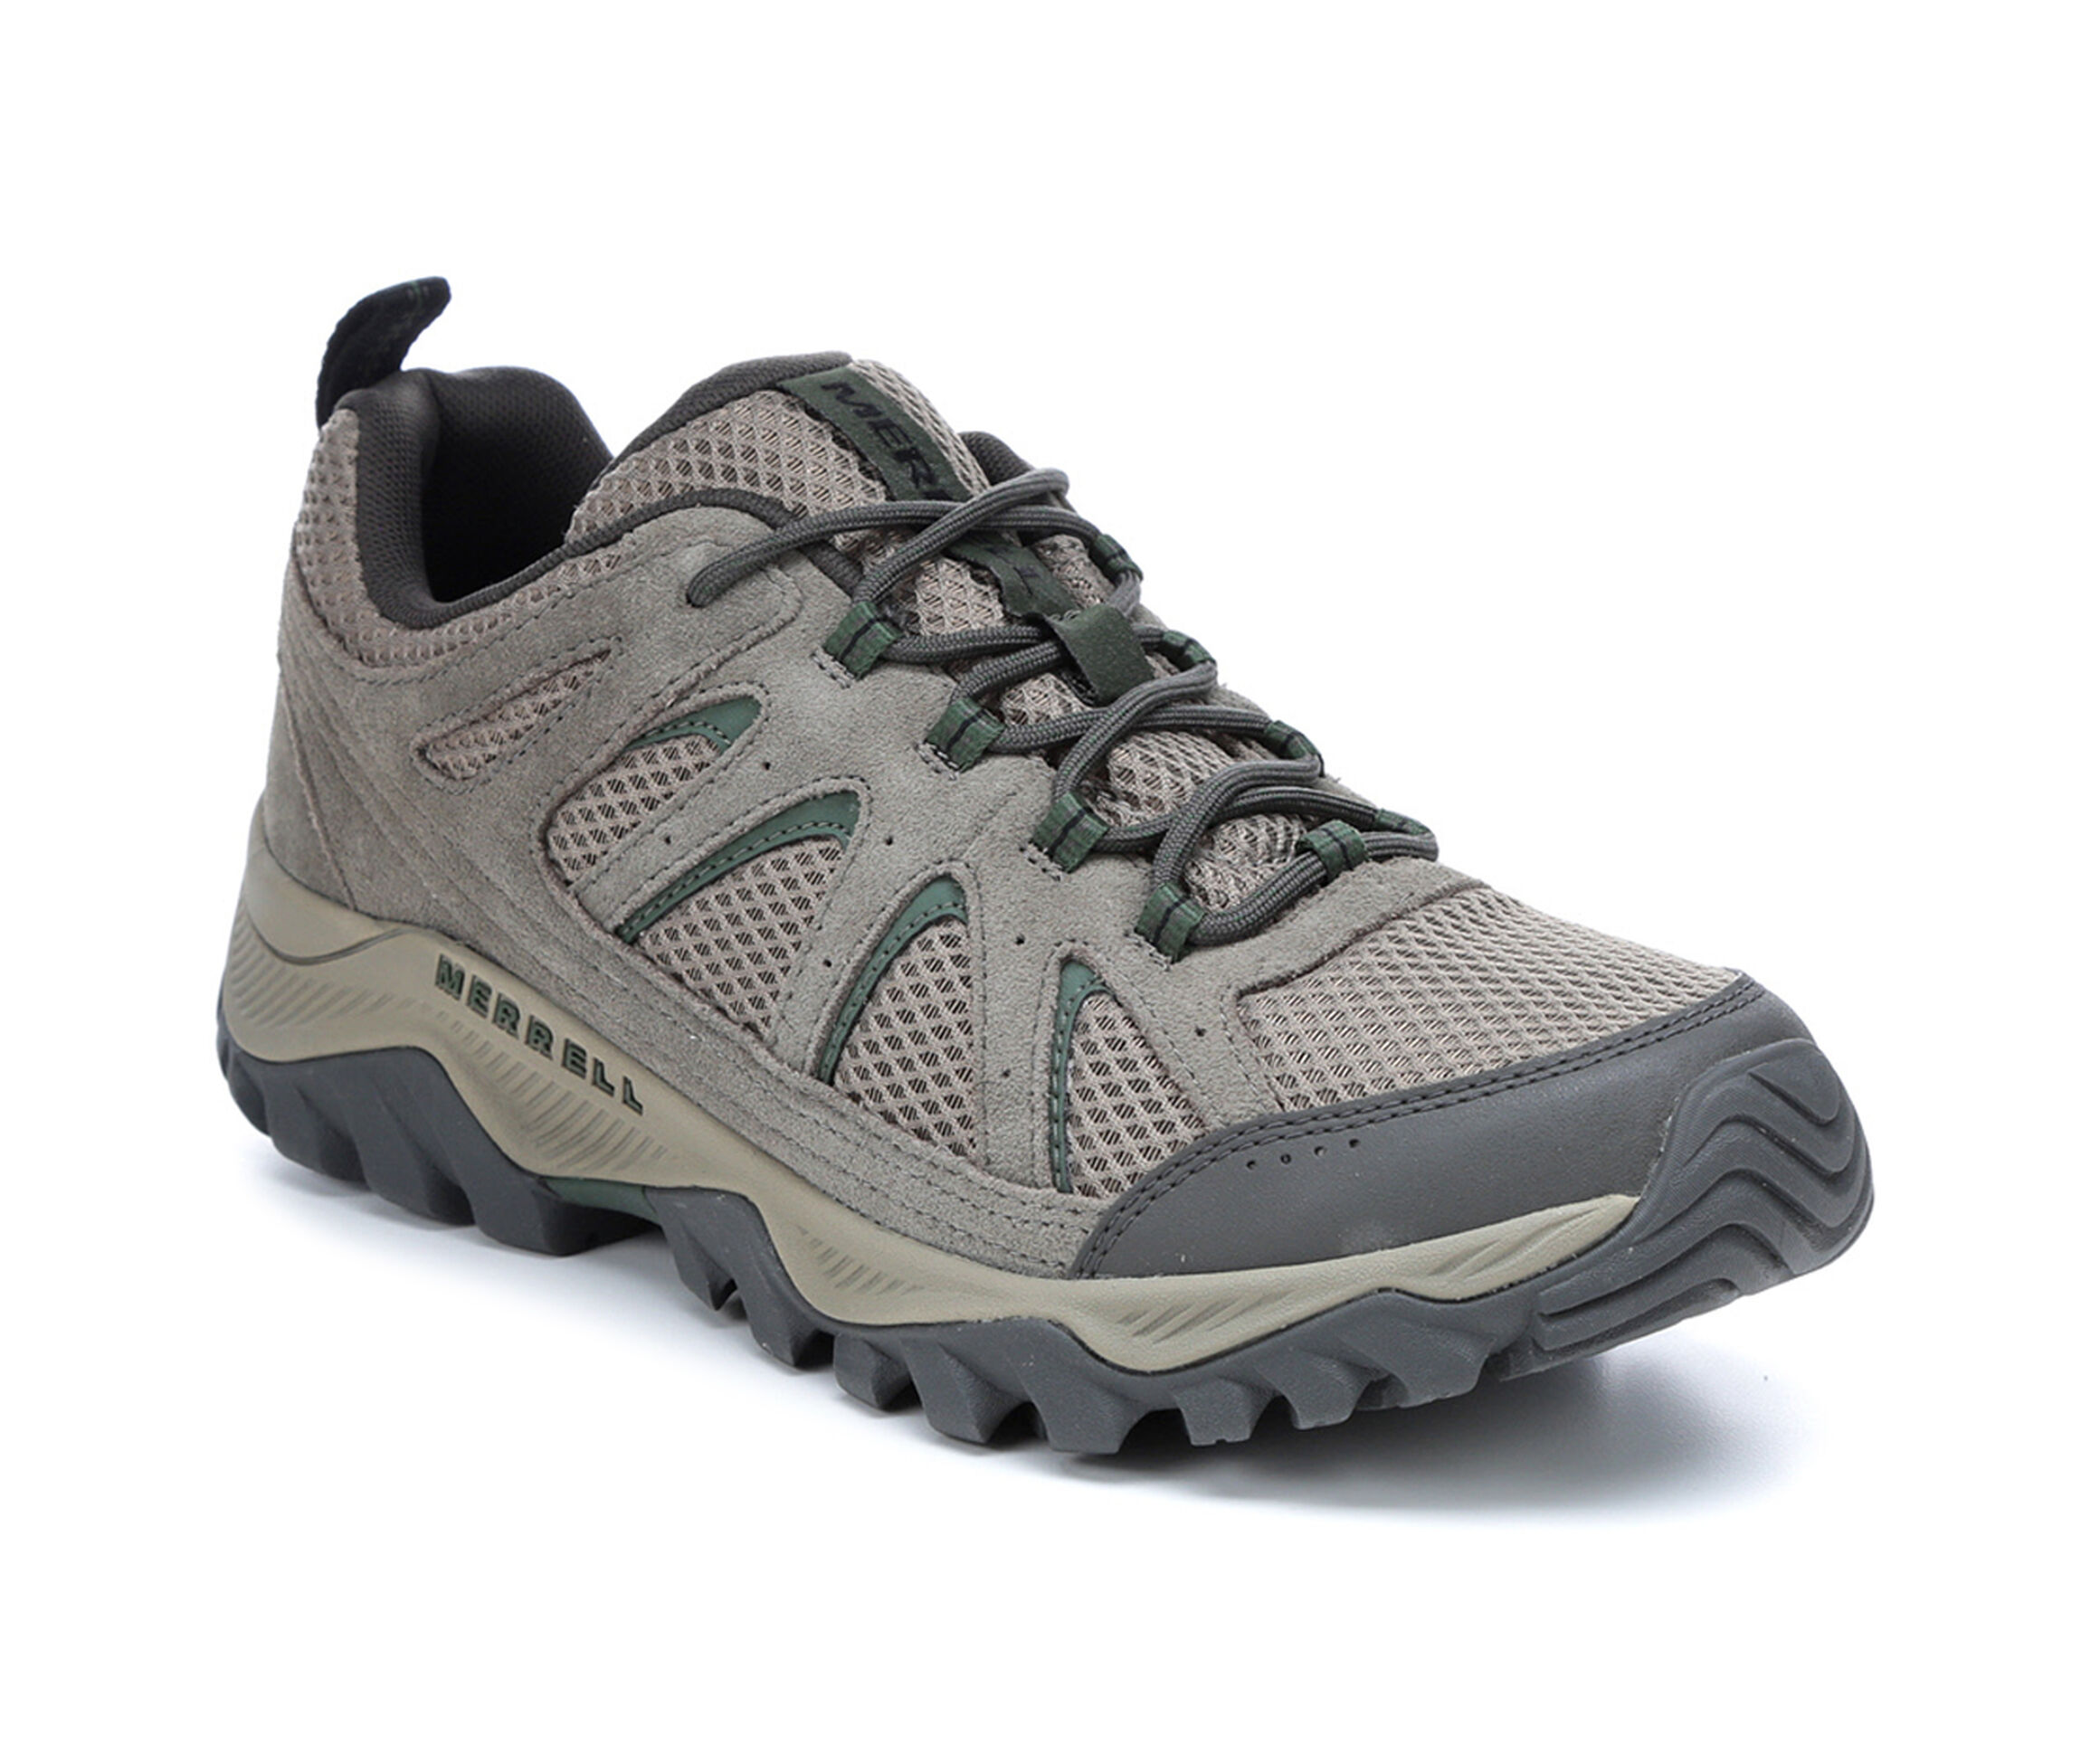 Merrell Outdoor Shoes & Hiking Boots | Shoe Carnival